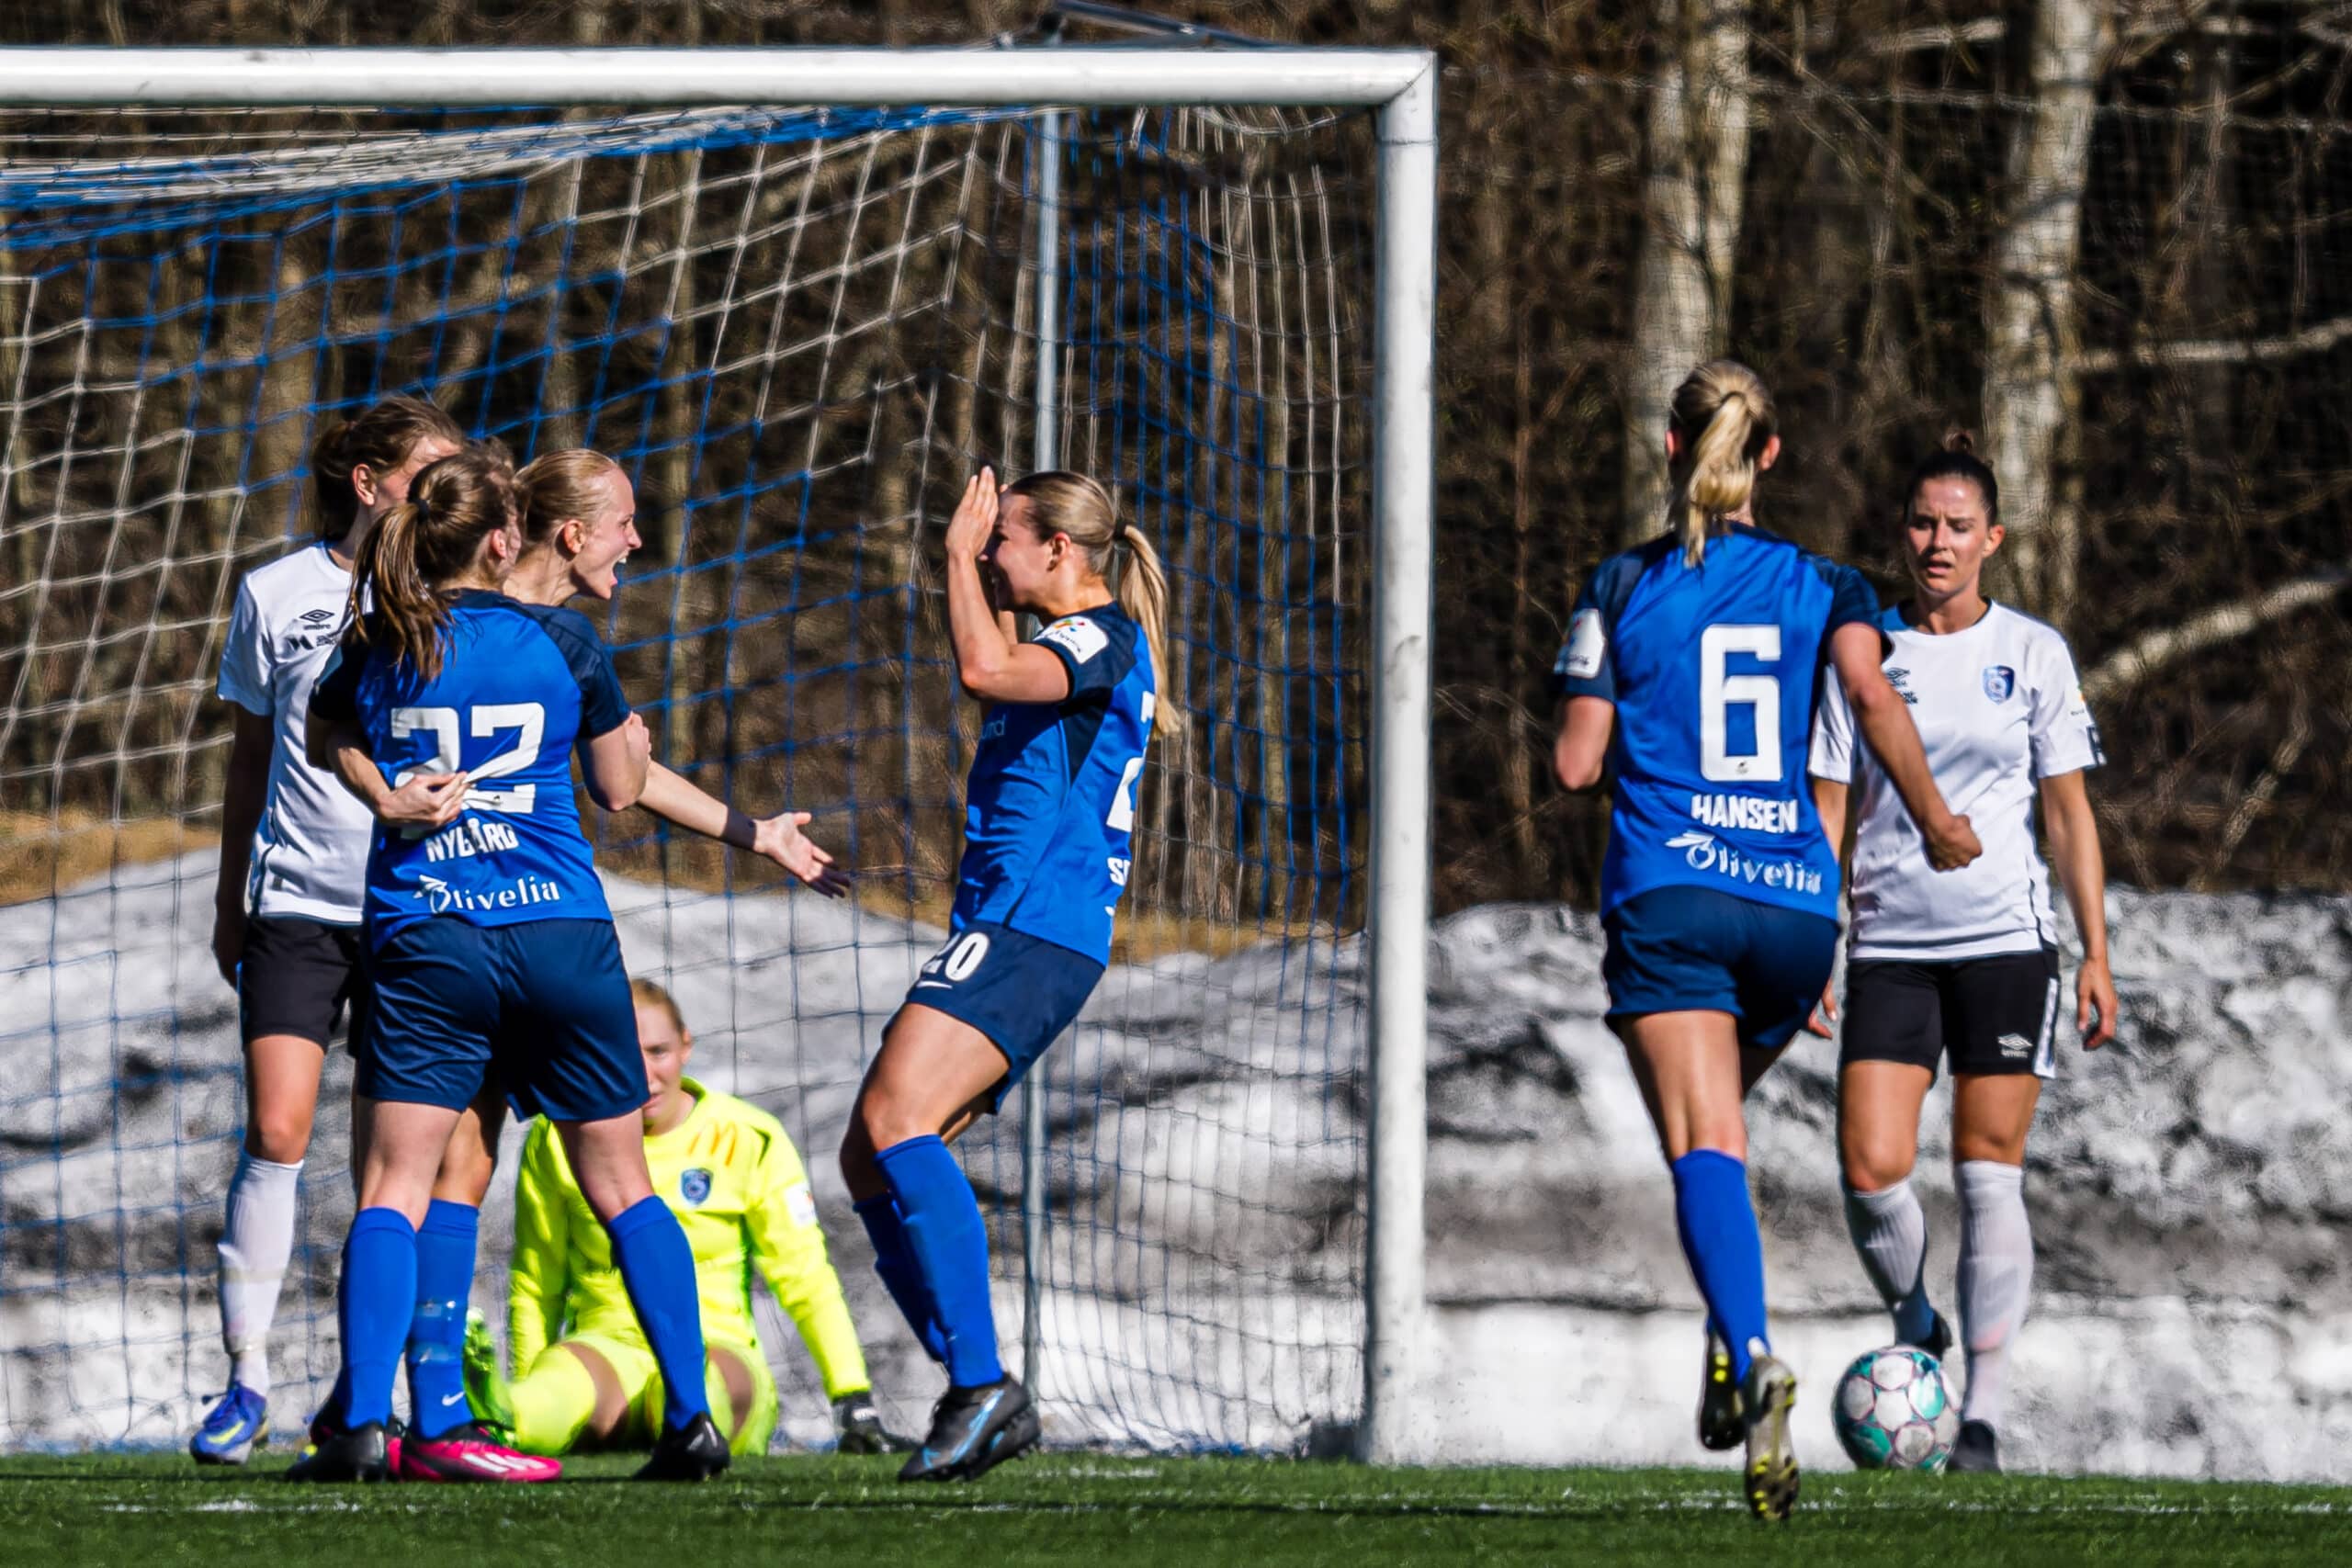 230422 Celina Opland Smith of Grei celebrates after scoring the 1-0 goal during the 1. division football match between Grei and Fyllingsdalen on April 22, 2023 in Oslo.
Photo: Marius Simensen / BILDBYRÅN / Cop 238